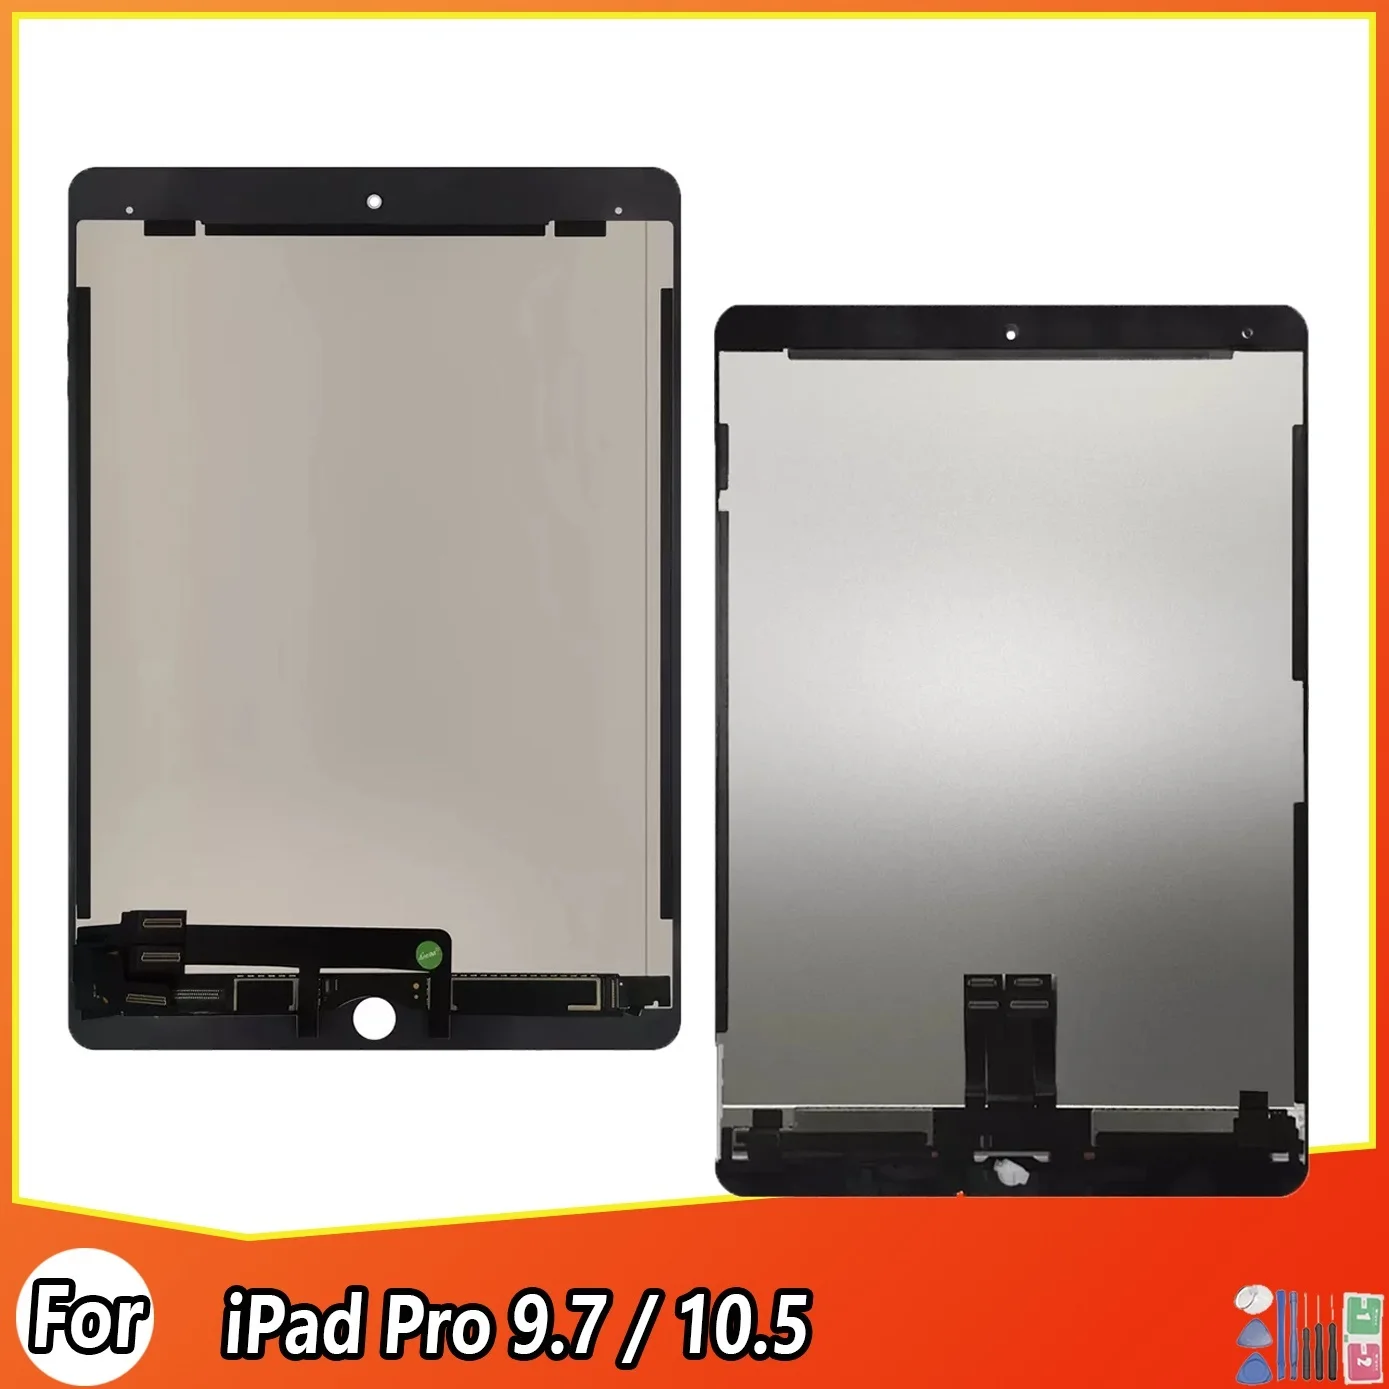 

New Original LCD for iPad Pro 9.7 / 10.5 1st Gen LCD Display Touch Screen Digitizer Assembly A1673 A1674 A1675 / A1701 A1709 Lcd